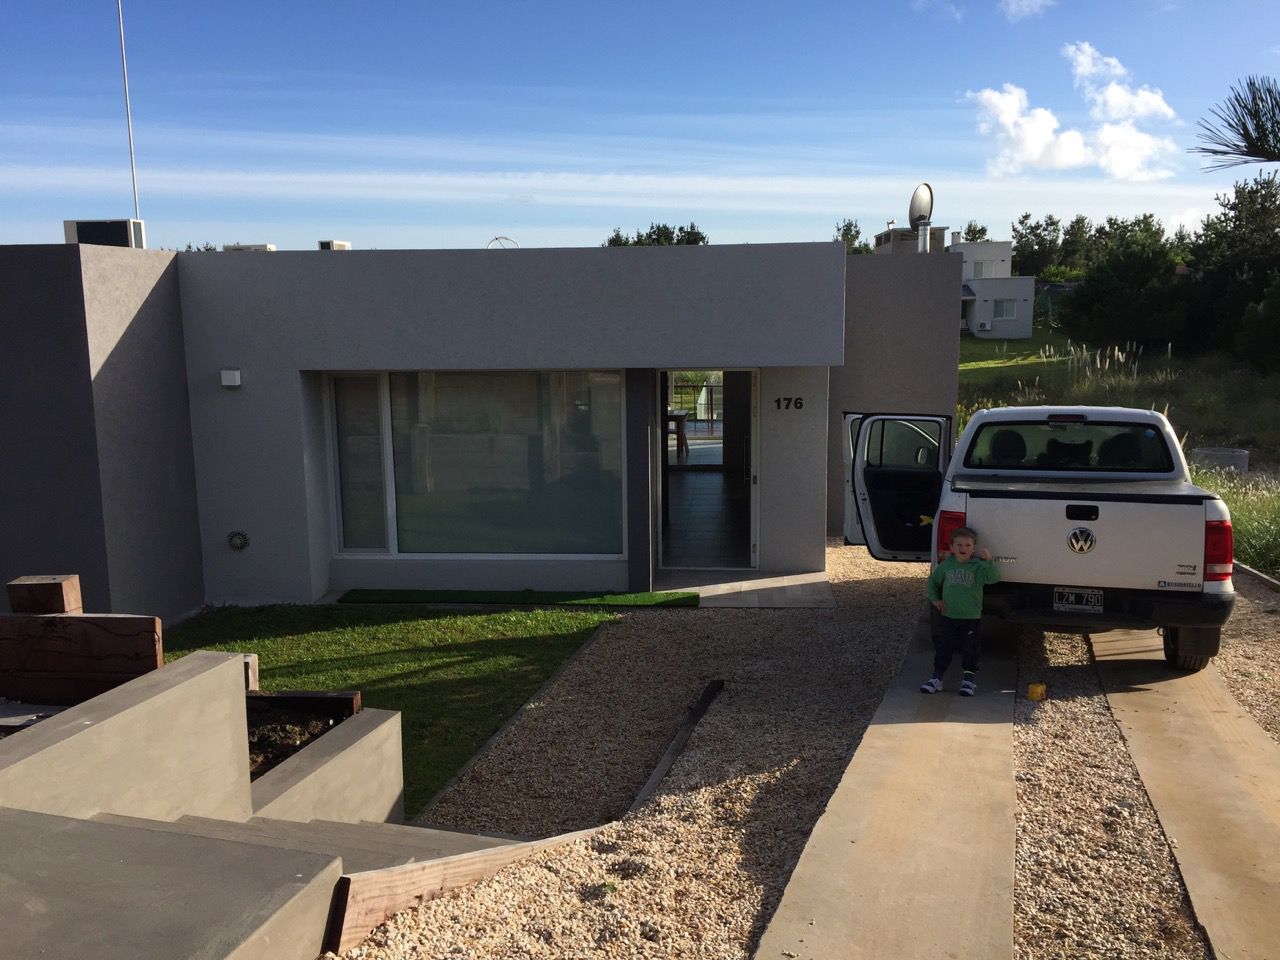 Barrio Residencial I lote 176